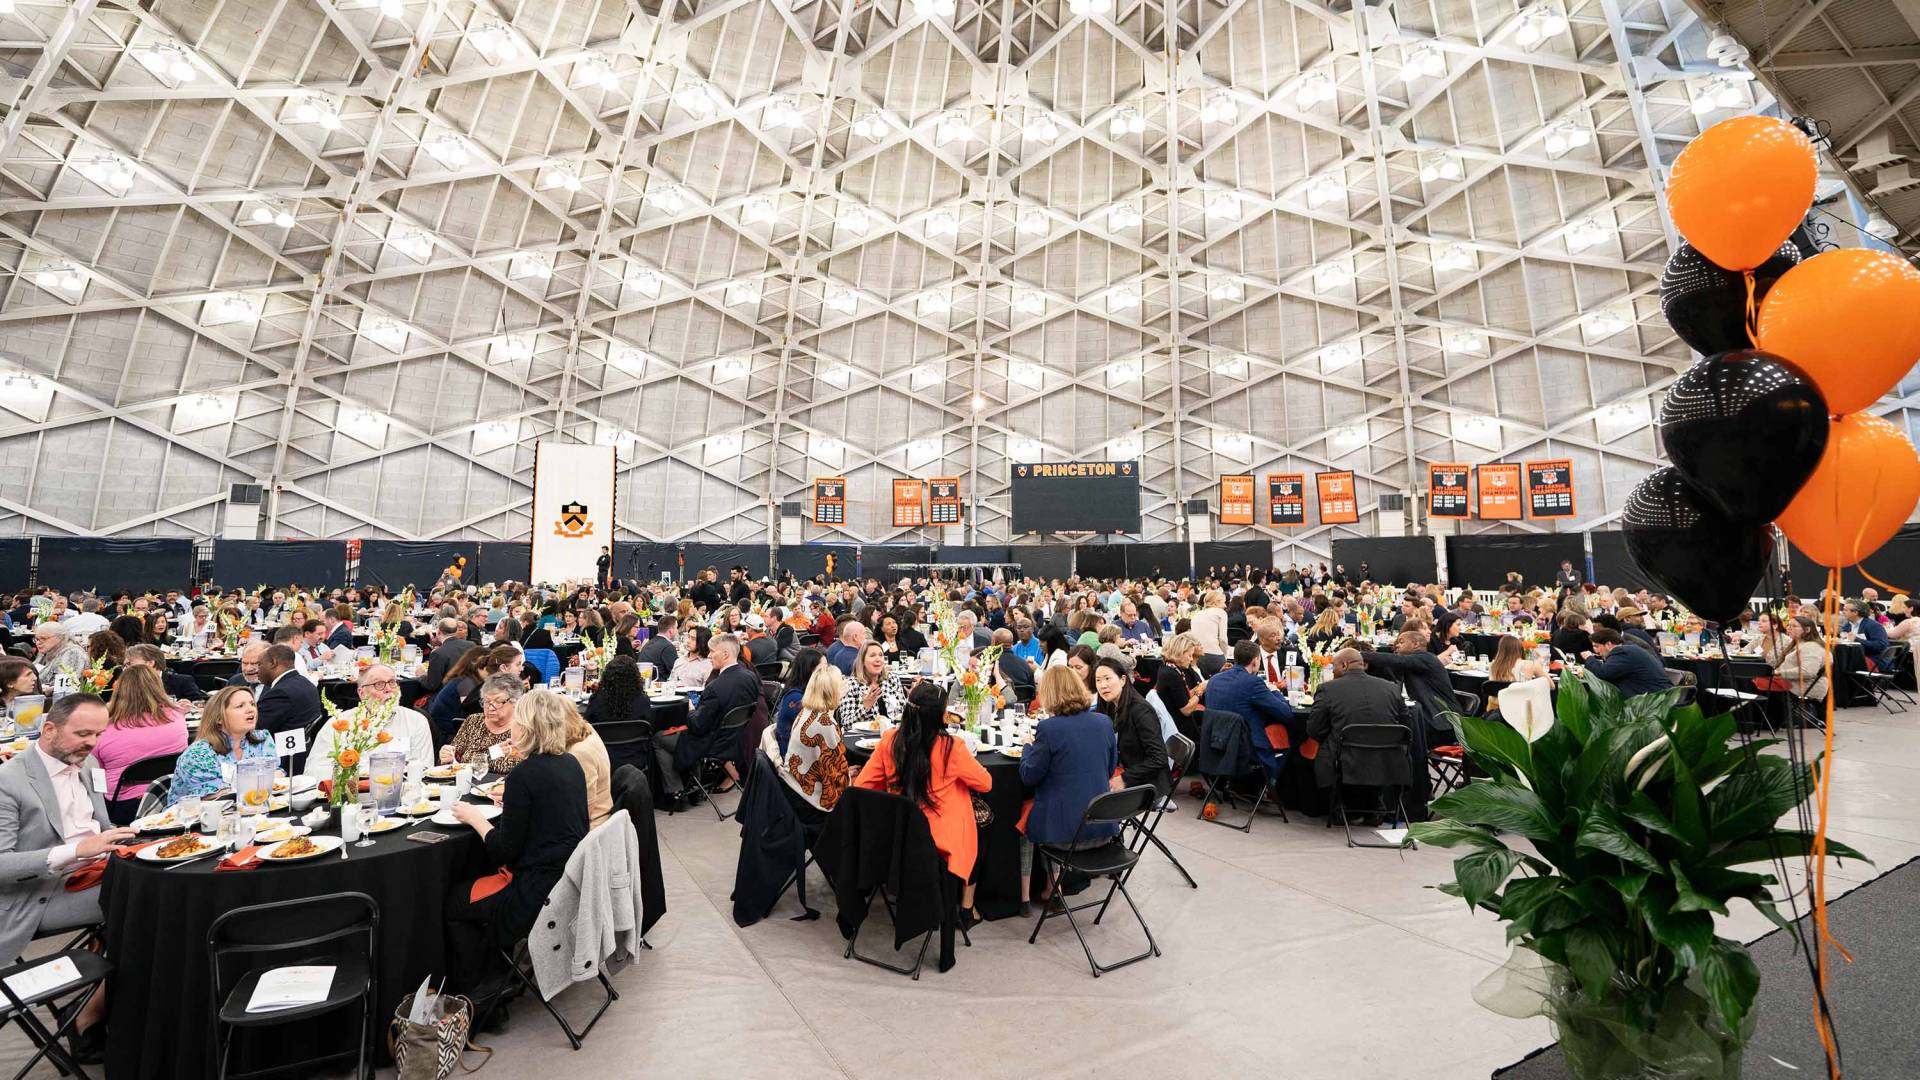 Diners converse during the luncheon at Jadwin Gym, bedecked in orange and black.